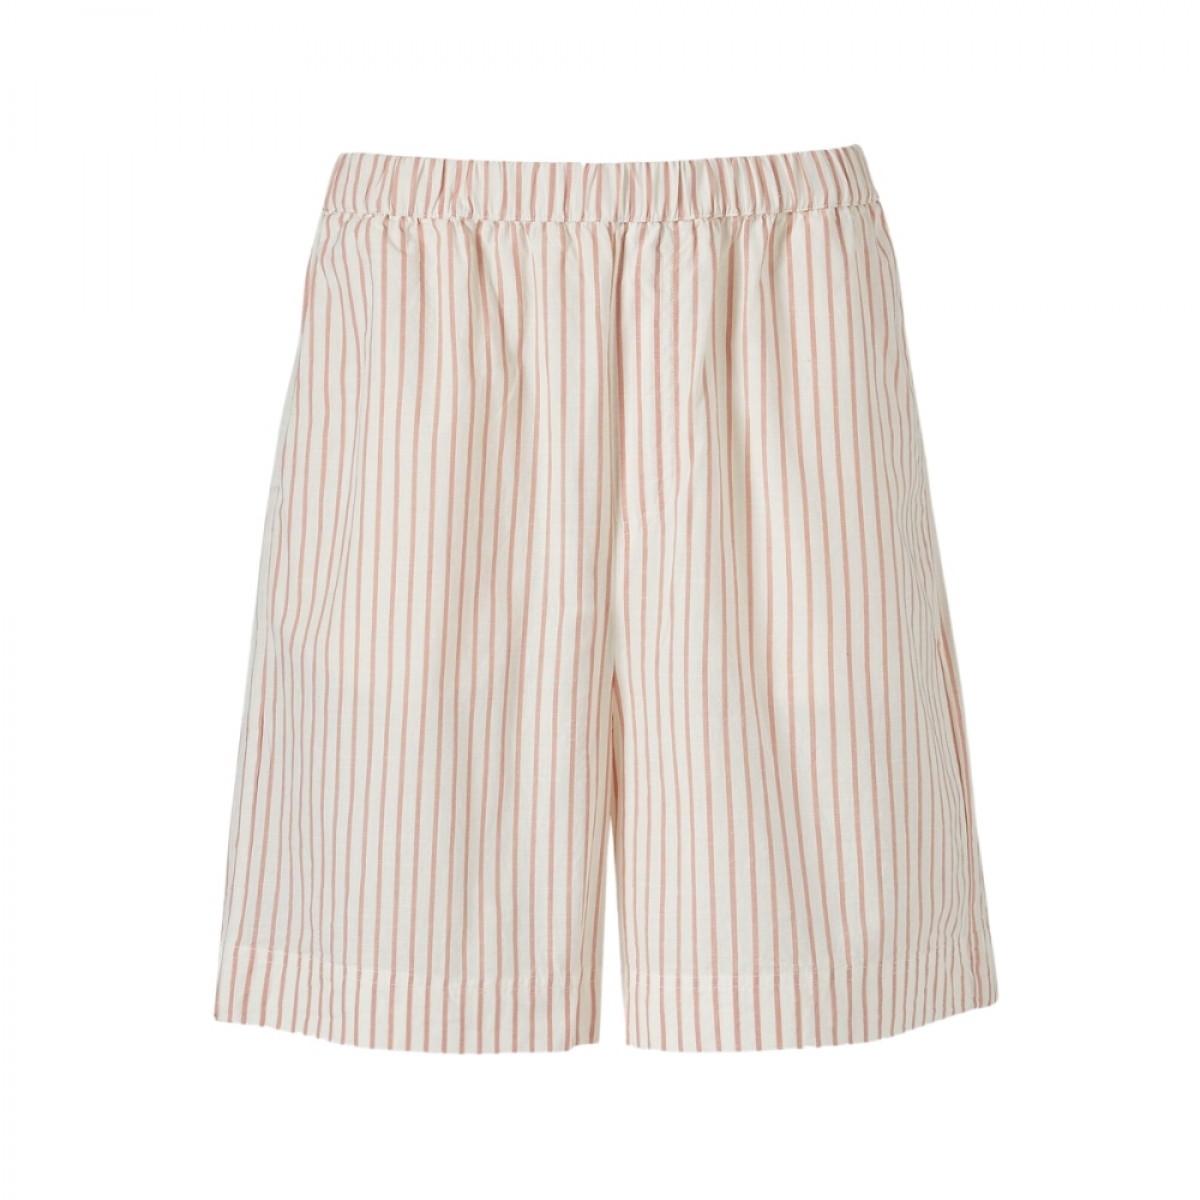 etta shorts striped - mix old rose - front